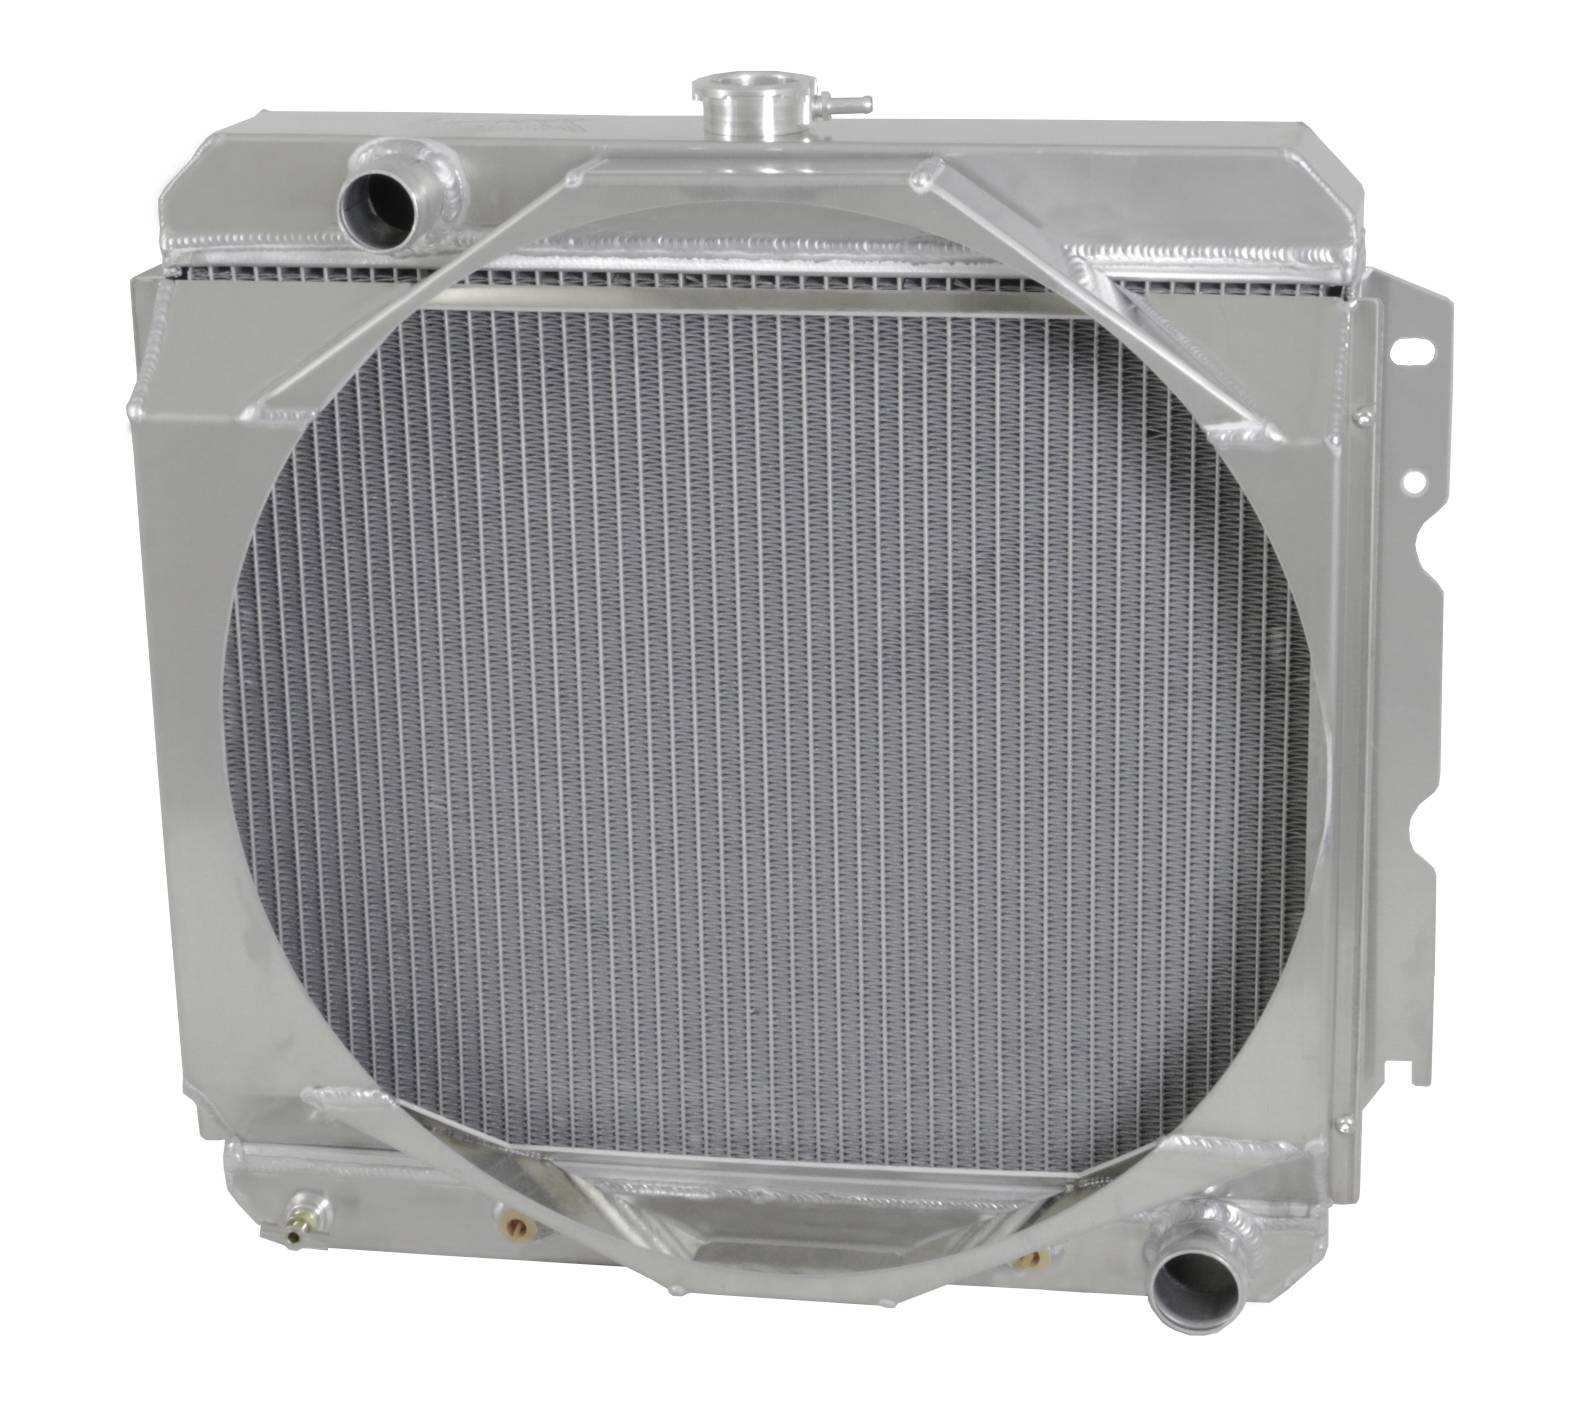 Wizard Cooling Inc - Wizard Cooling - 1970-73 22" Mopar Applications w/ OEM Style Shroud - 526-215